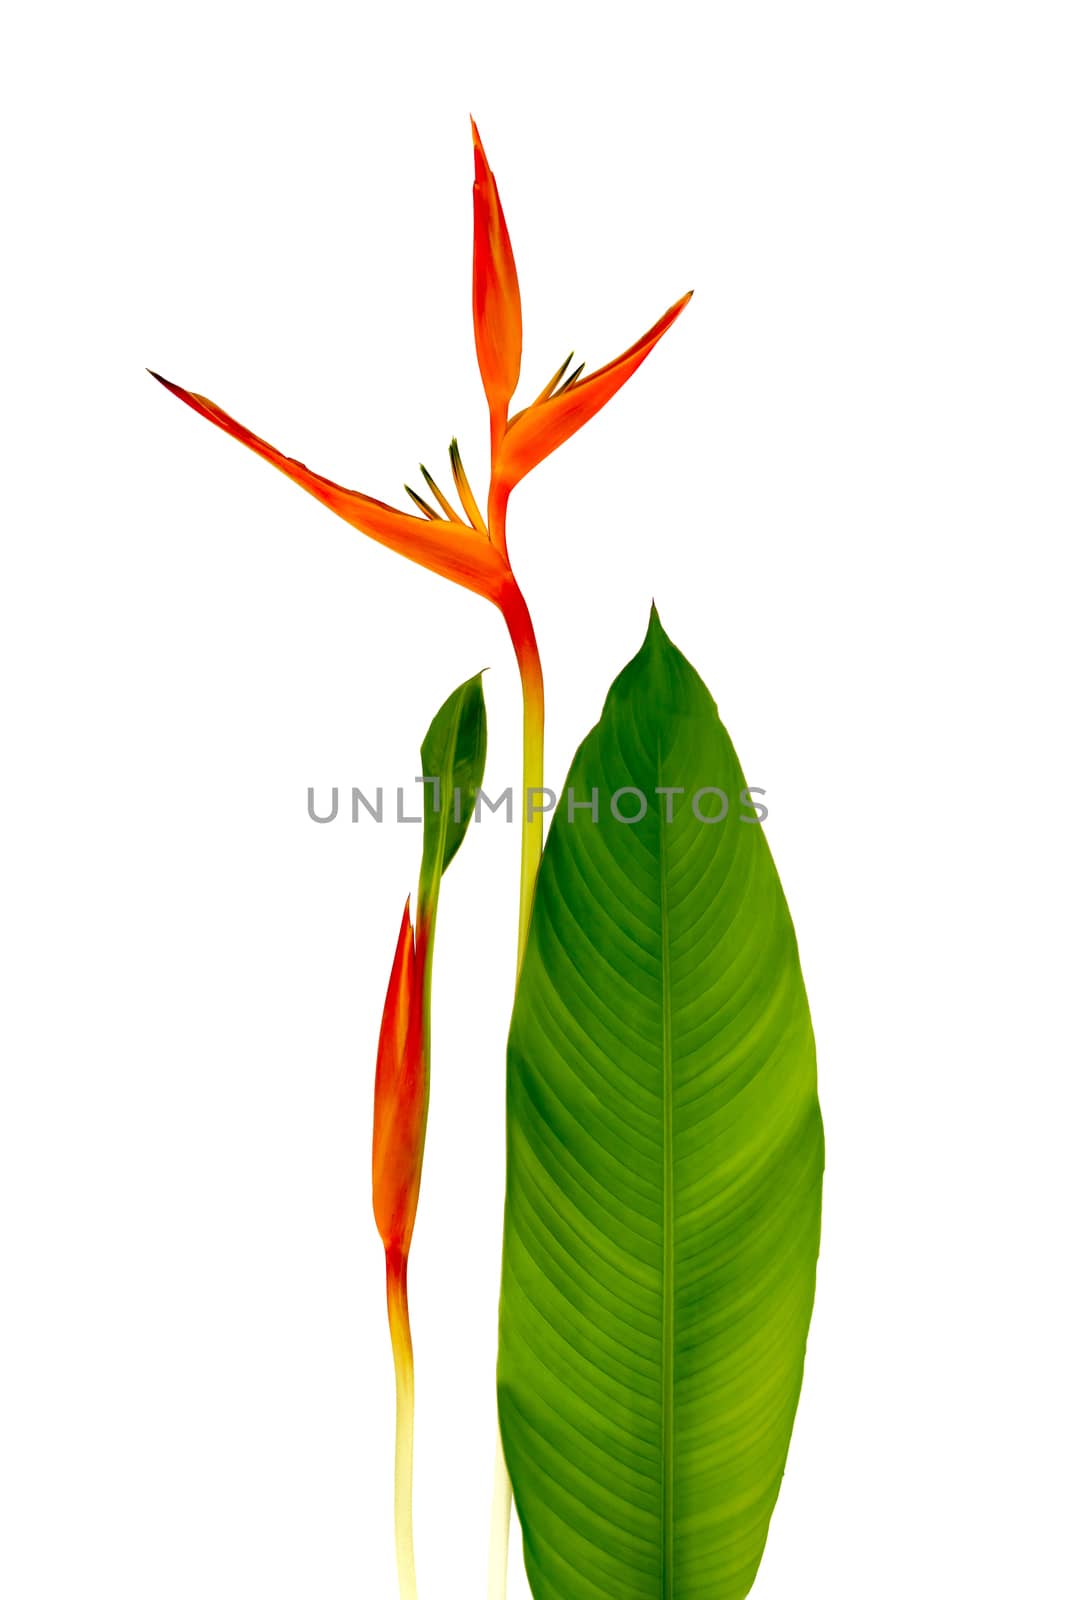 Beautiful Red, Yellow And Orange Heliconia (Heliconia Spp.) Flower Isolated On White Background, Tropical Vivid Color Flower On White Background, Heliconia Or Bird Of Paradise Flower